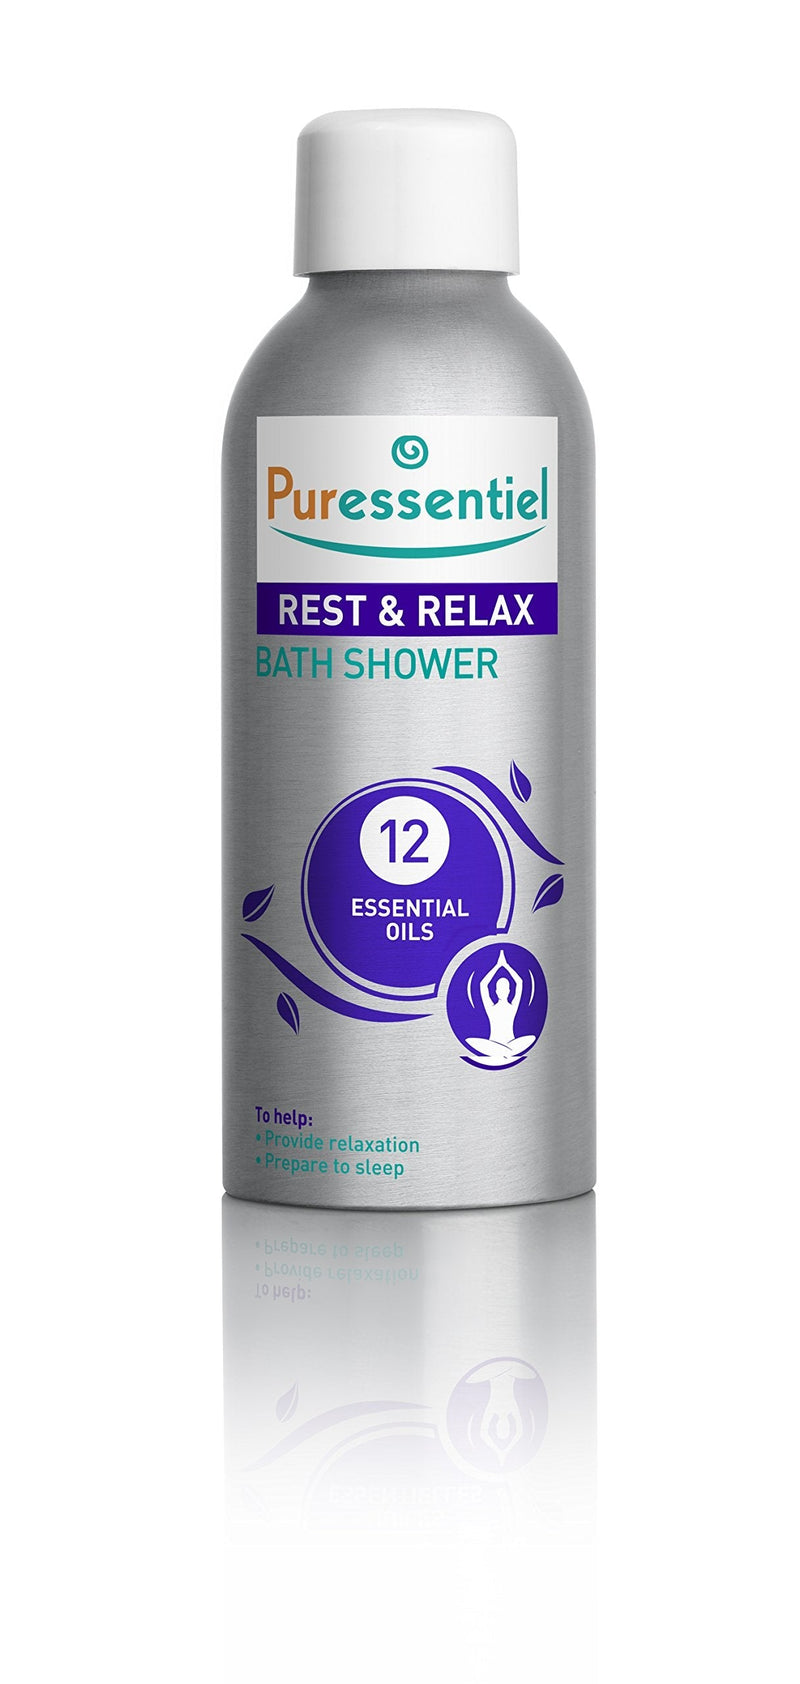 [Australia] - Puressentiel Rest & Relax Bath-Shower 100 ml - Helps prepare for sleep and provide relaxation, 100% pure essential oils, non-foaming, soap-free 